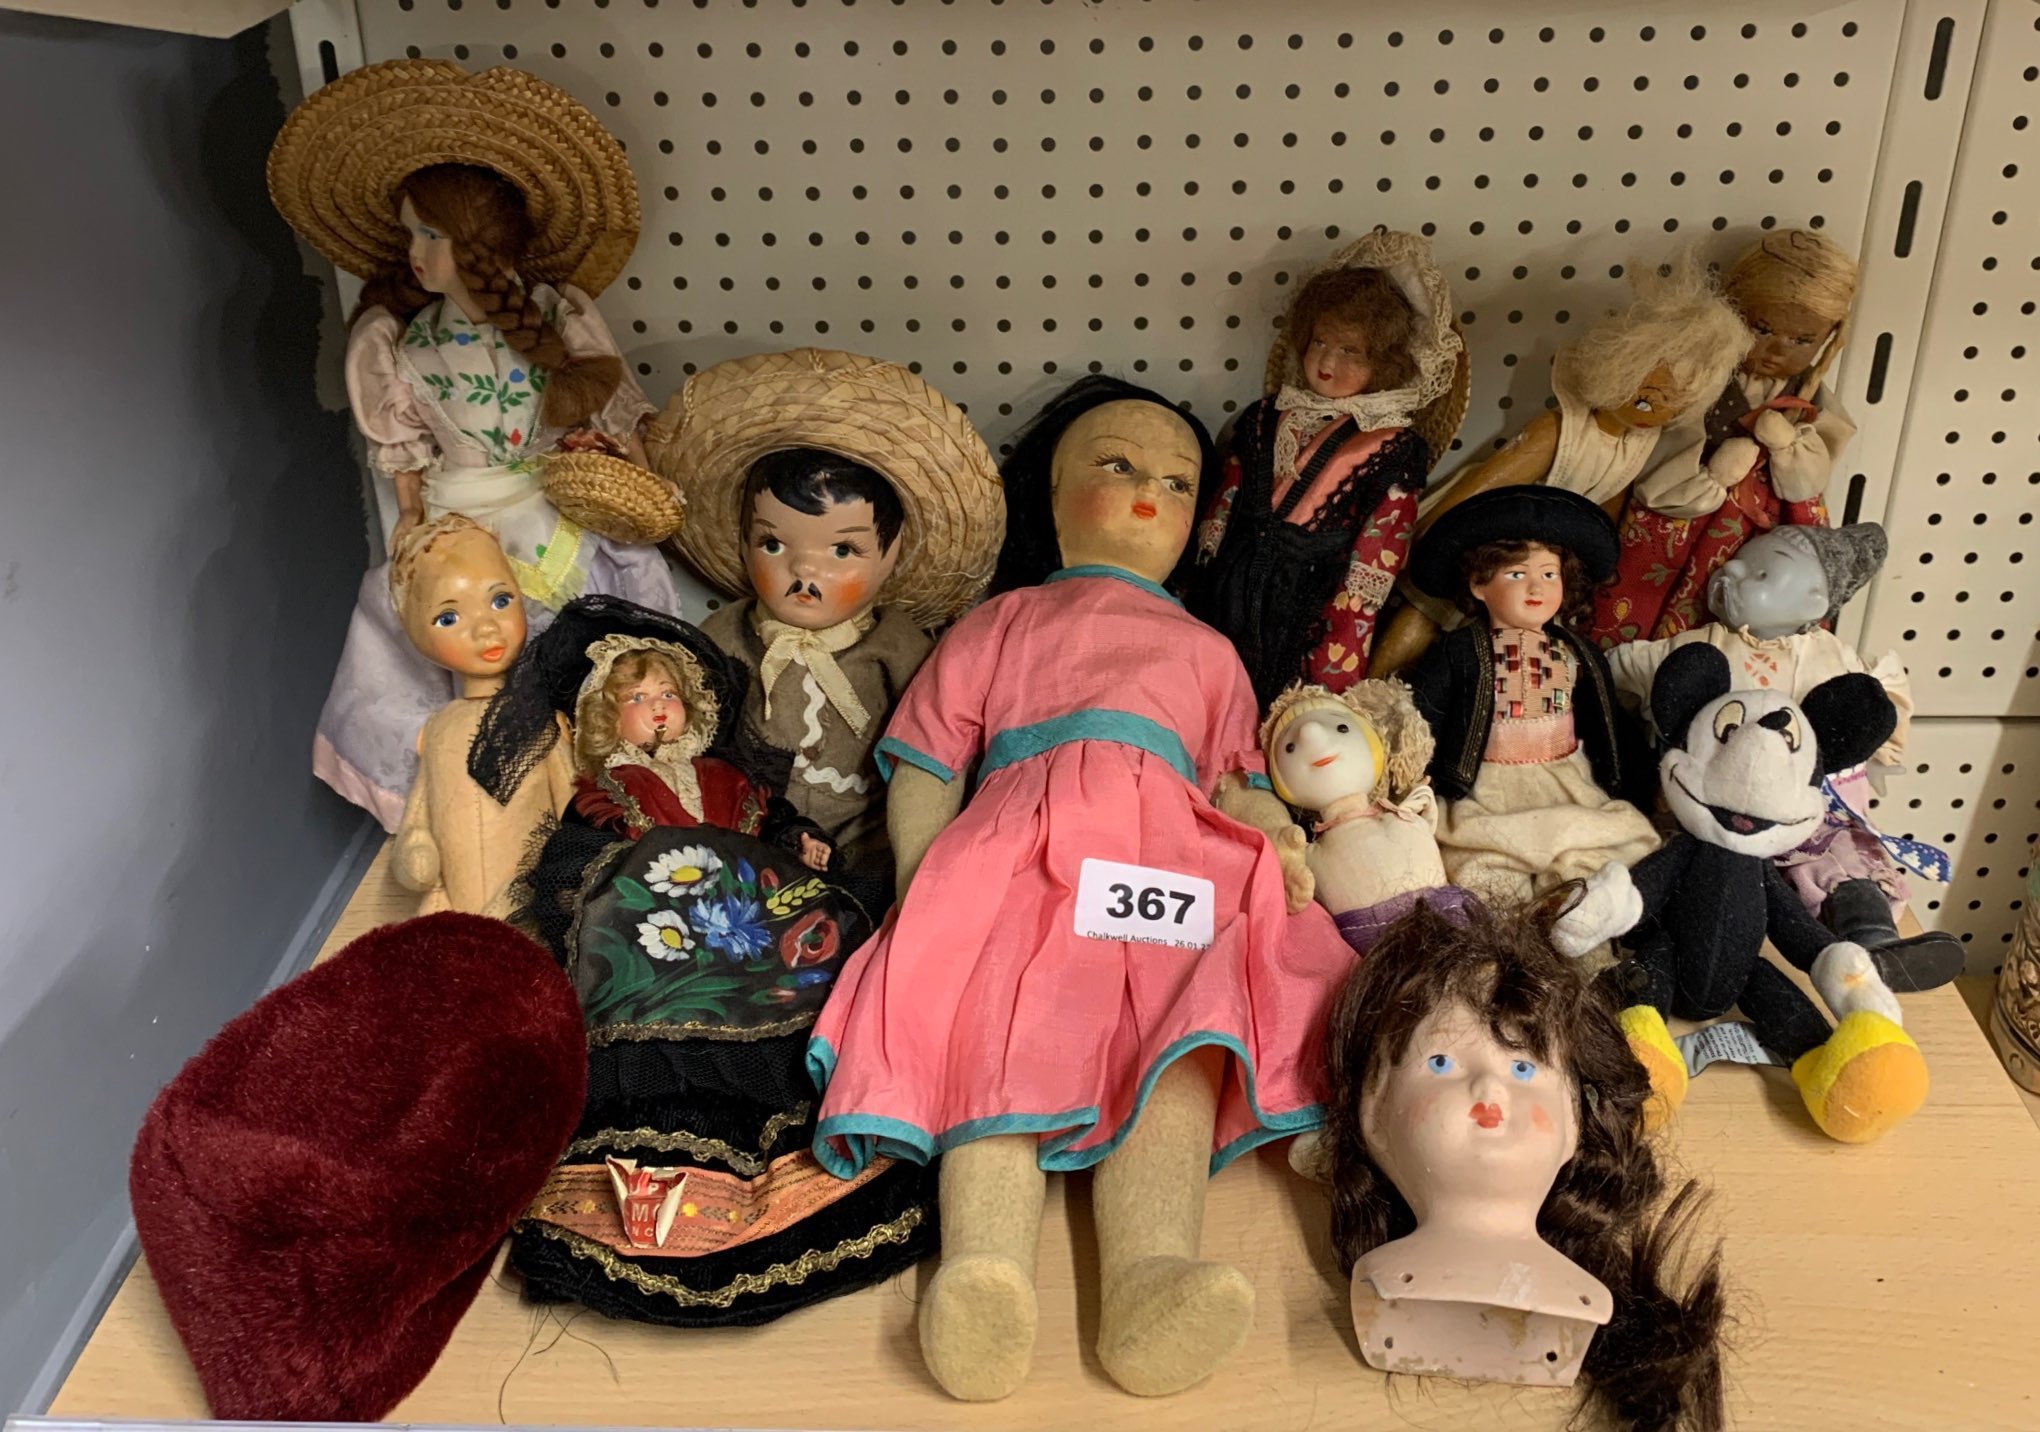 A group of vintage dolls and toys.